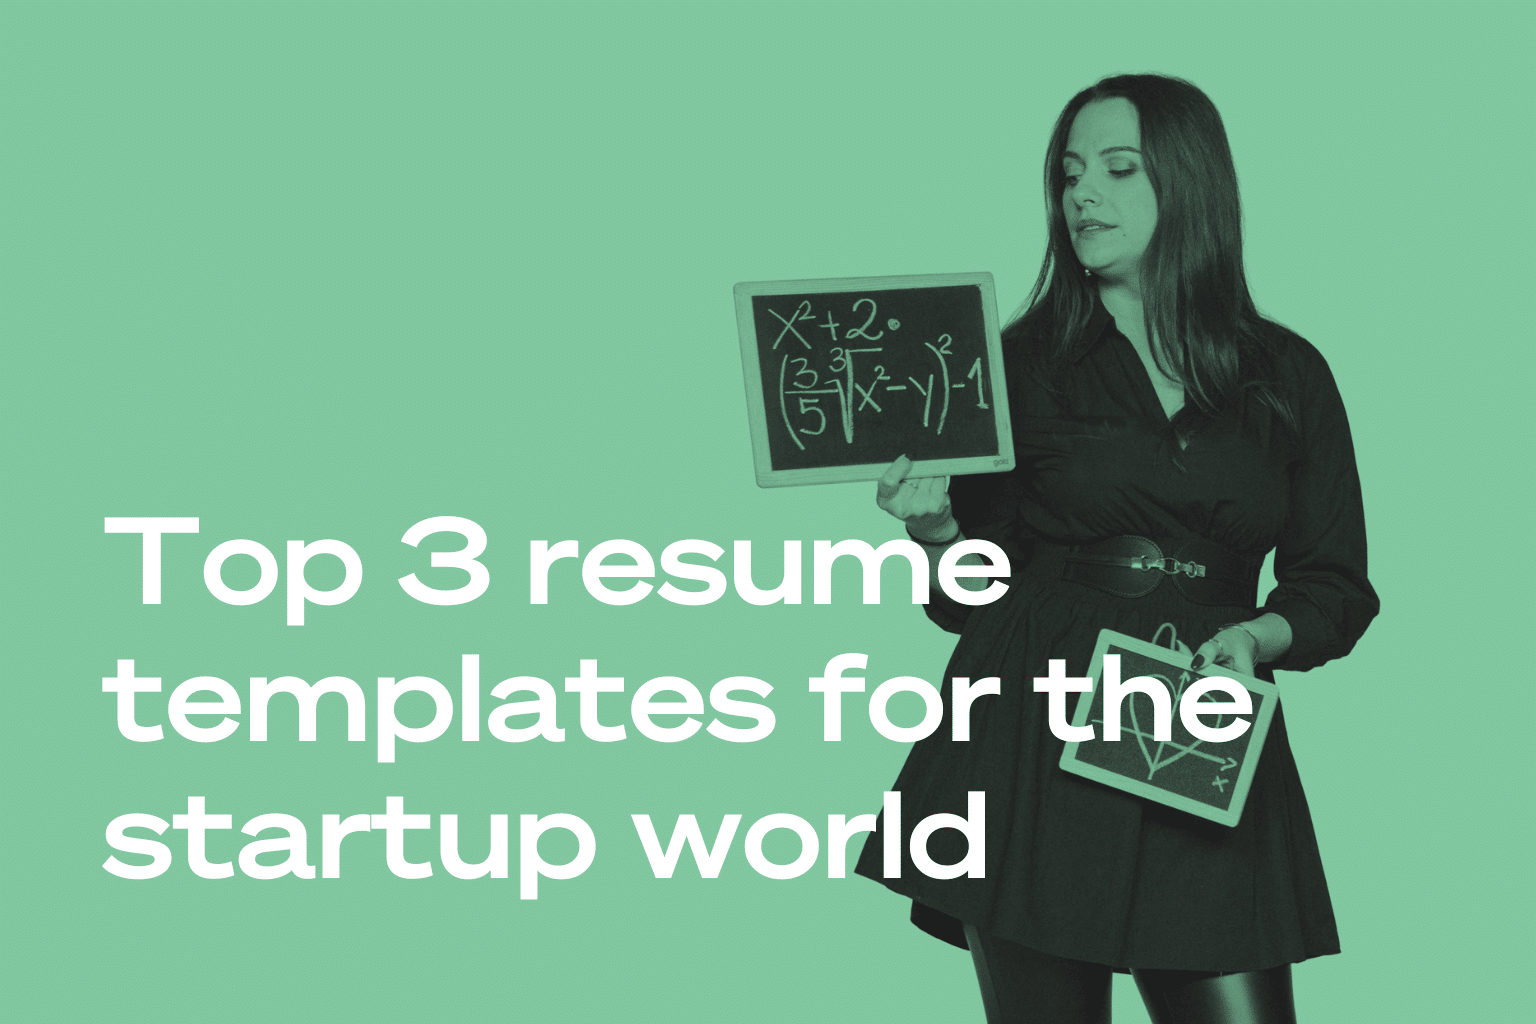 Top-3-resume-templates-for-the-startup-world